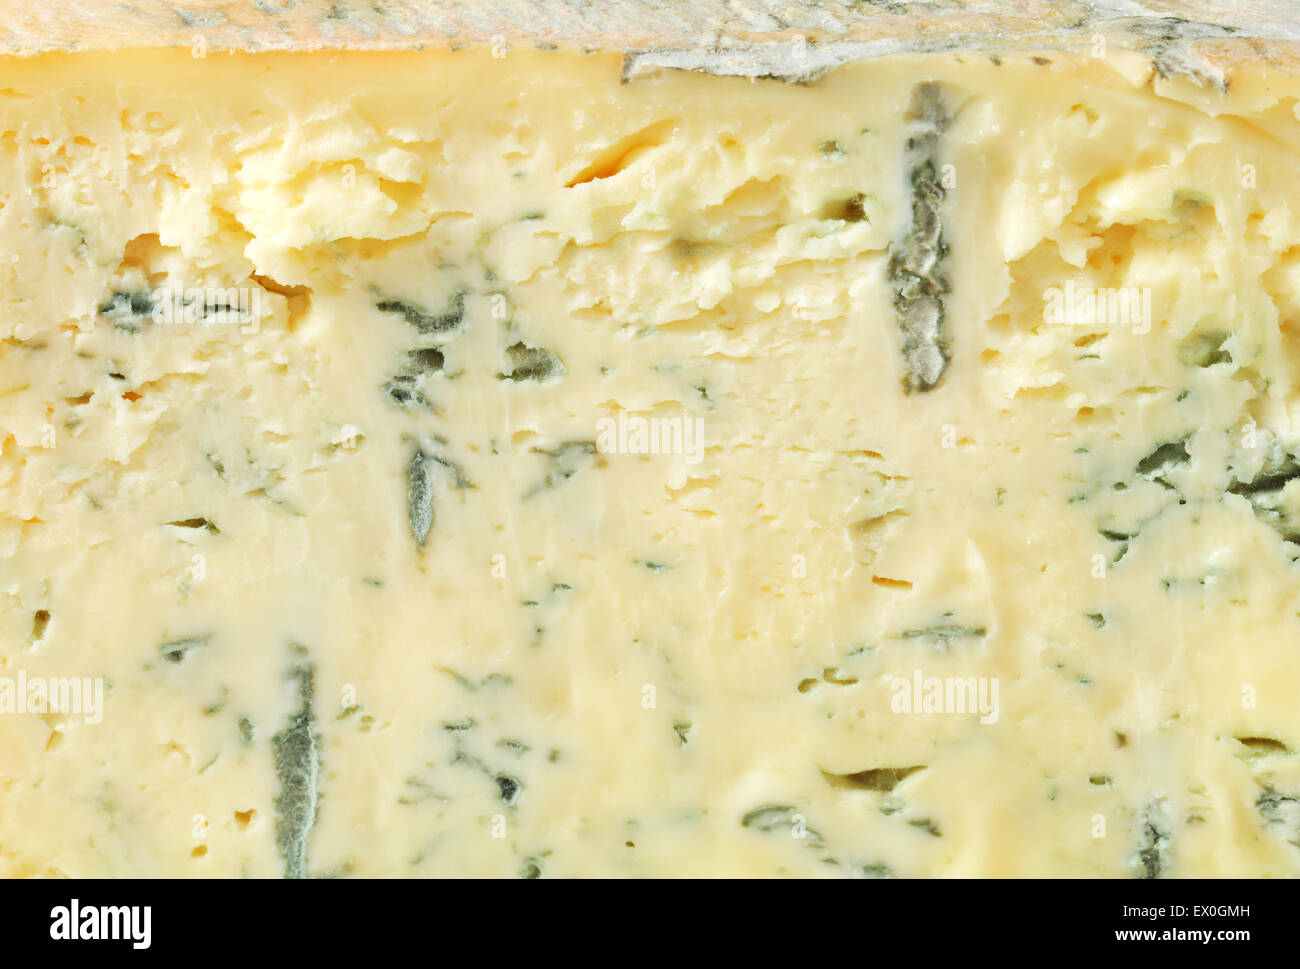 Detail of blue cheese - full frame Stock Photo